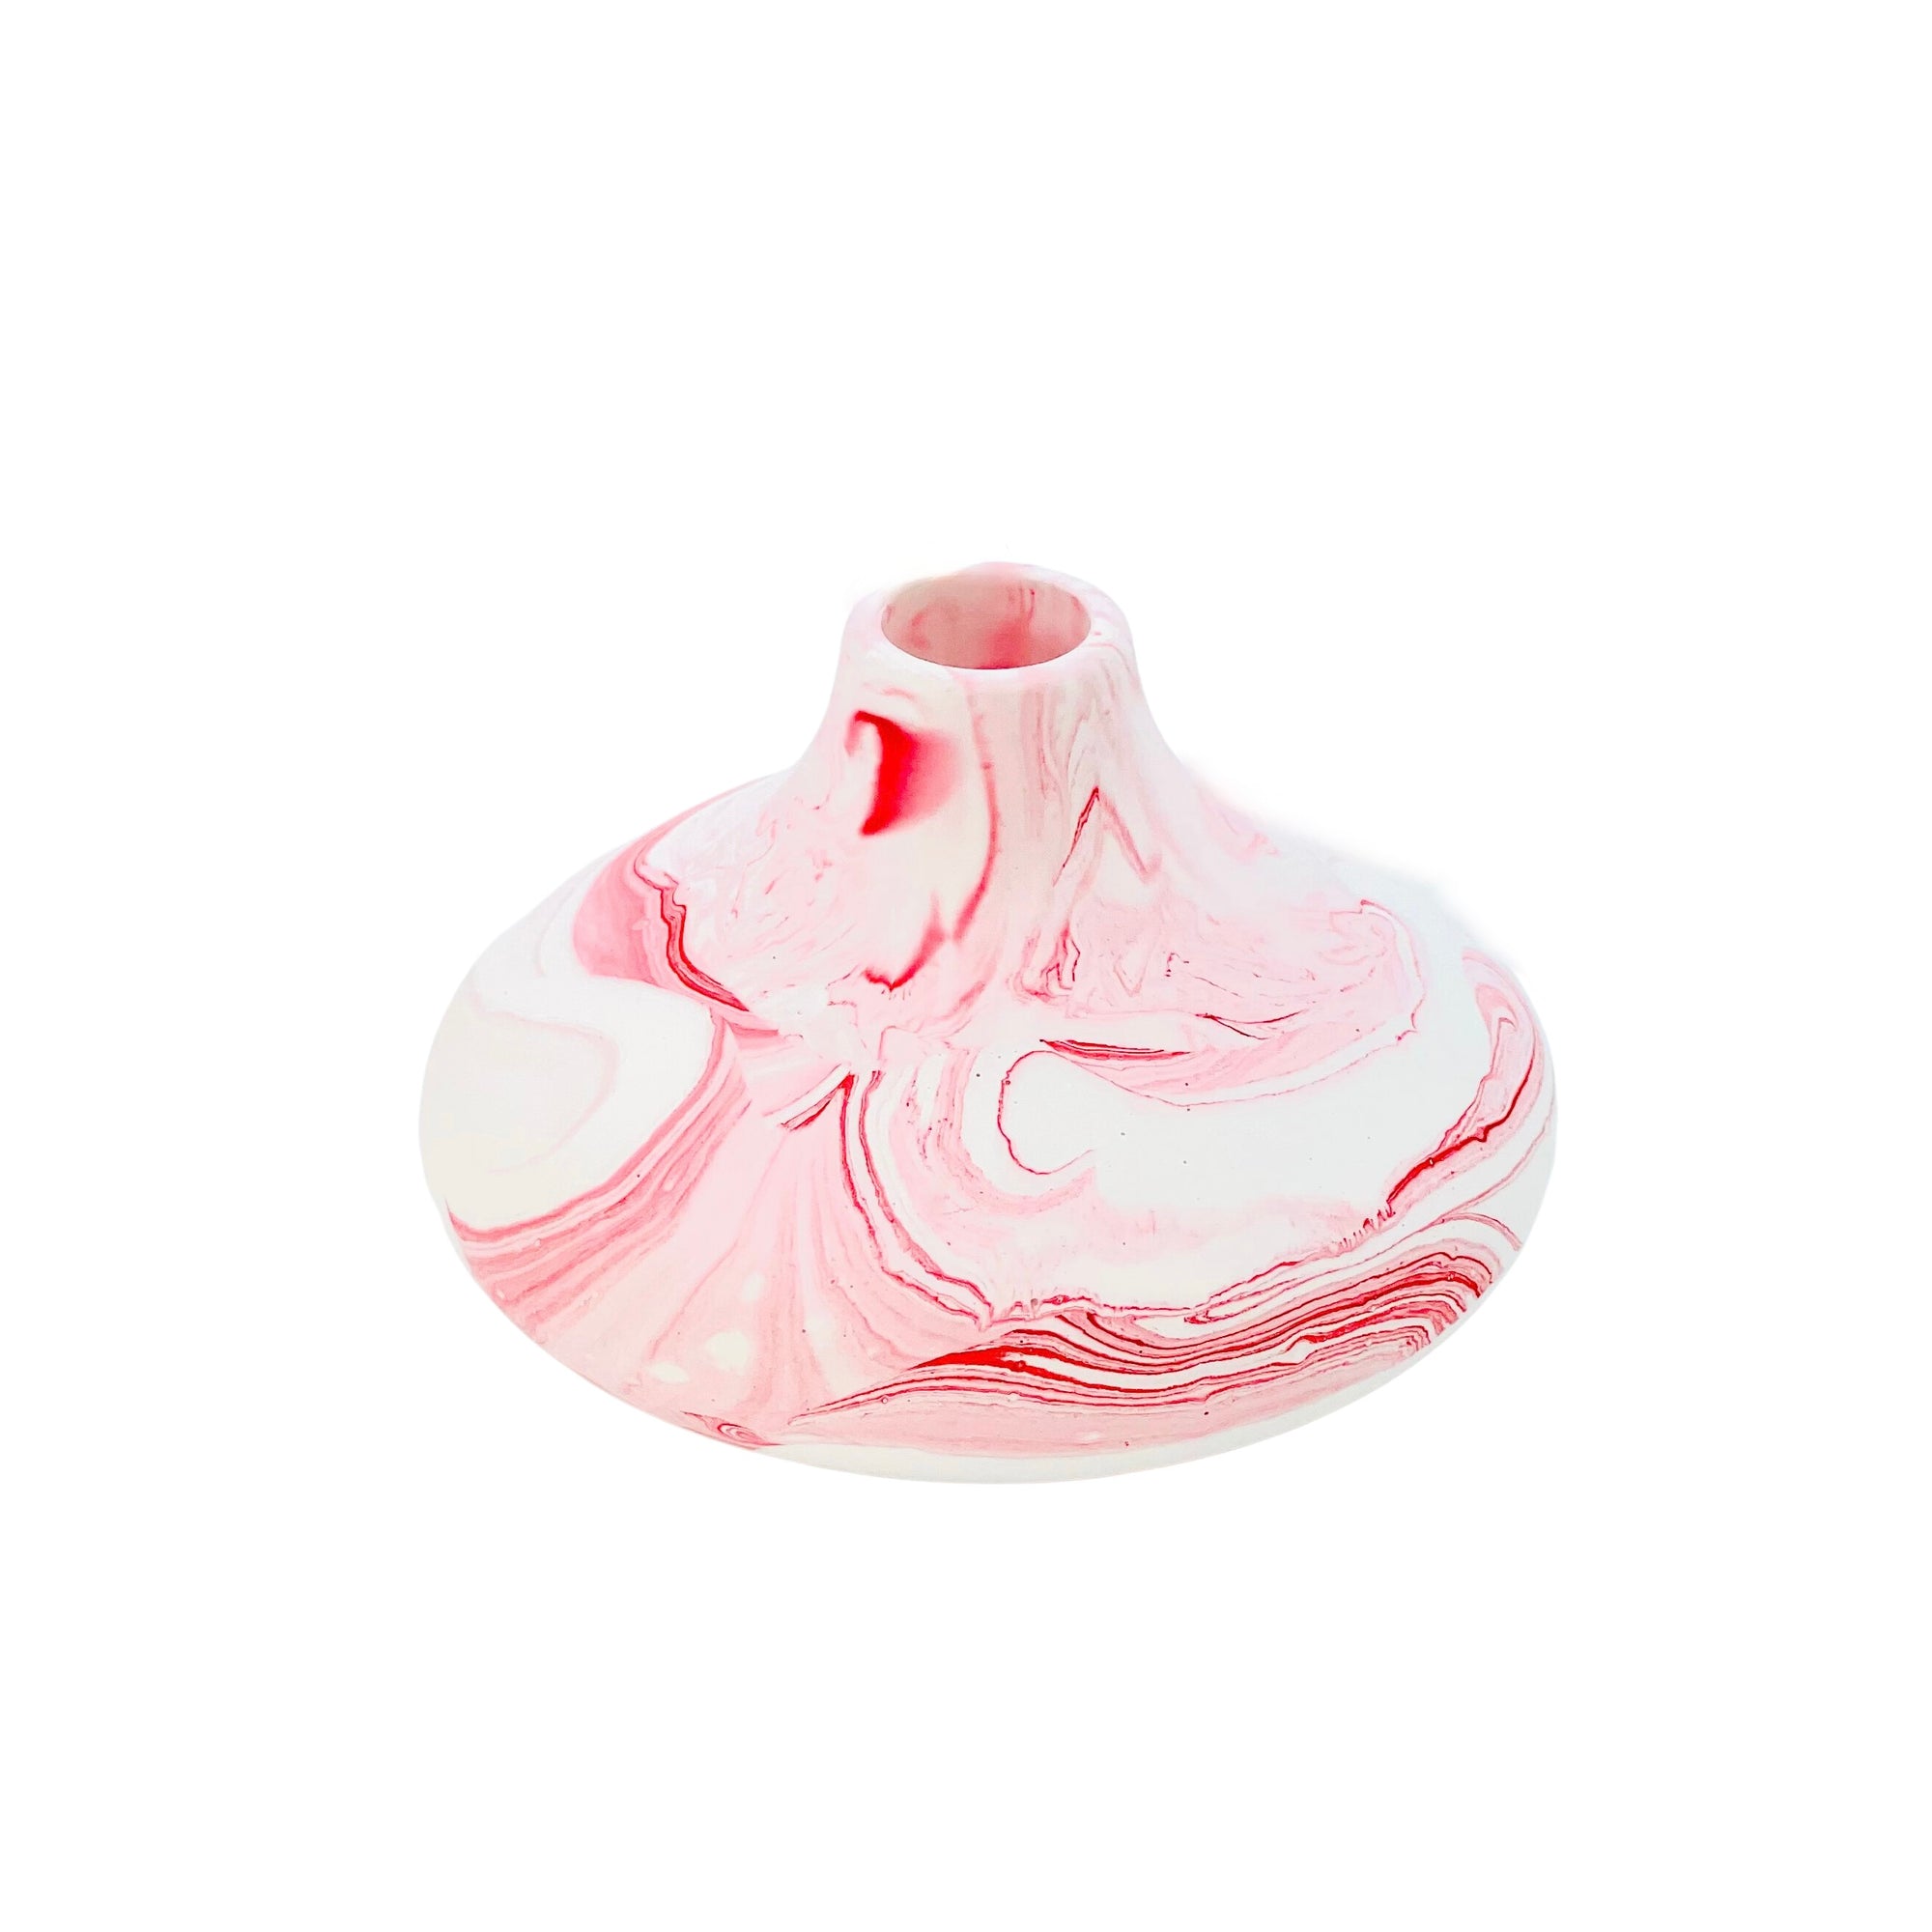 This small bulbous Jesmonite vase is marbled with red and white pigment.